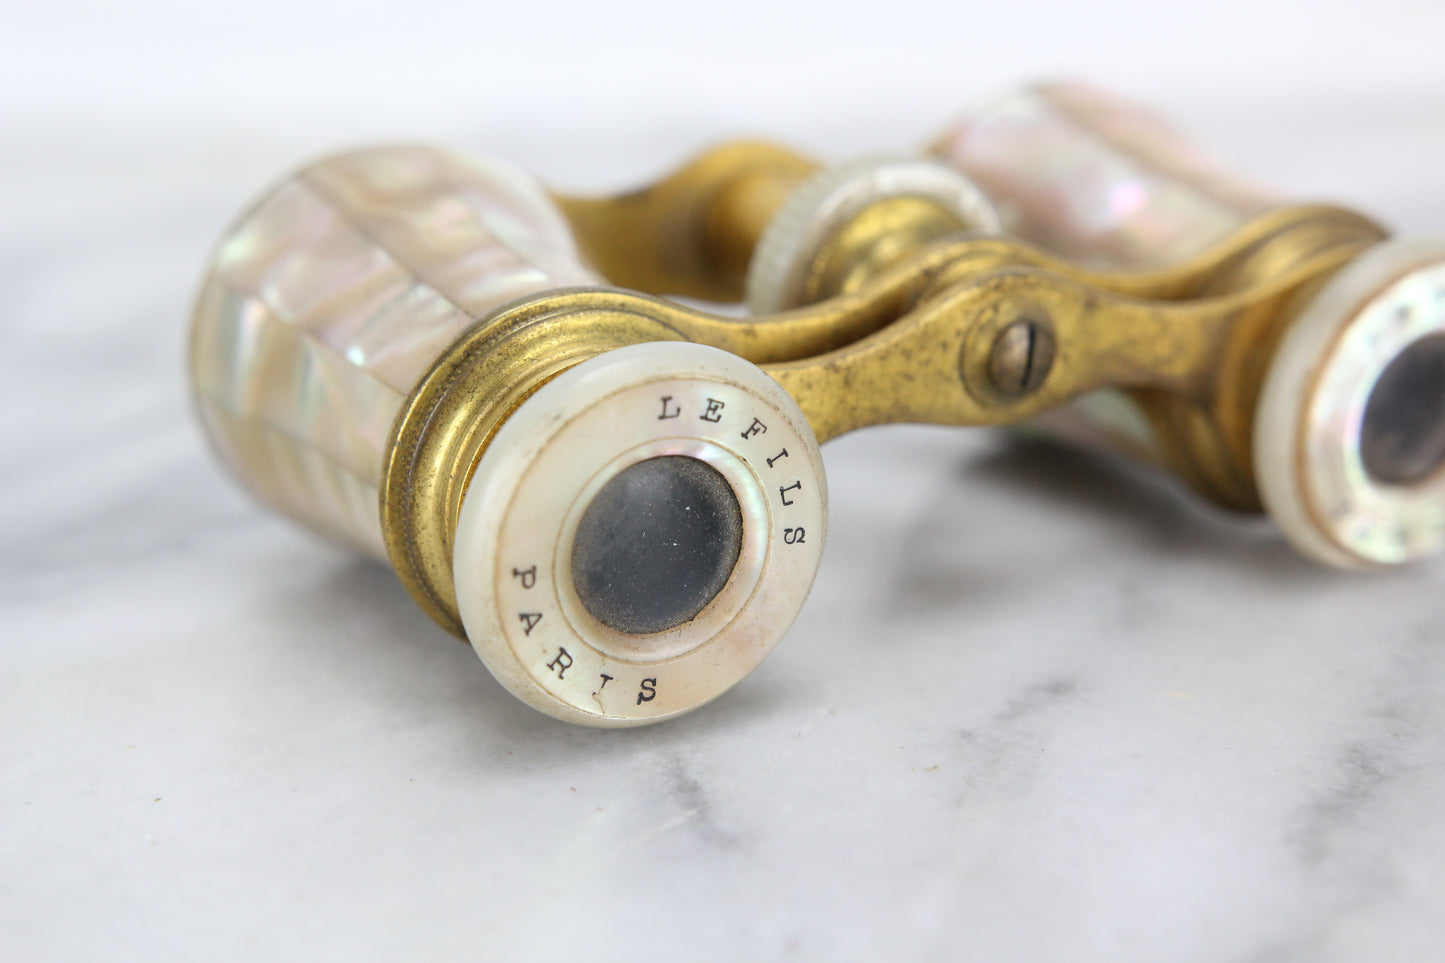 Le Fils Paris Mother of Pearl and Brass Opera Glasses with Case